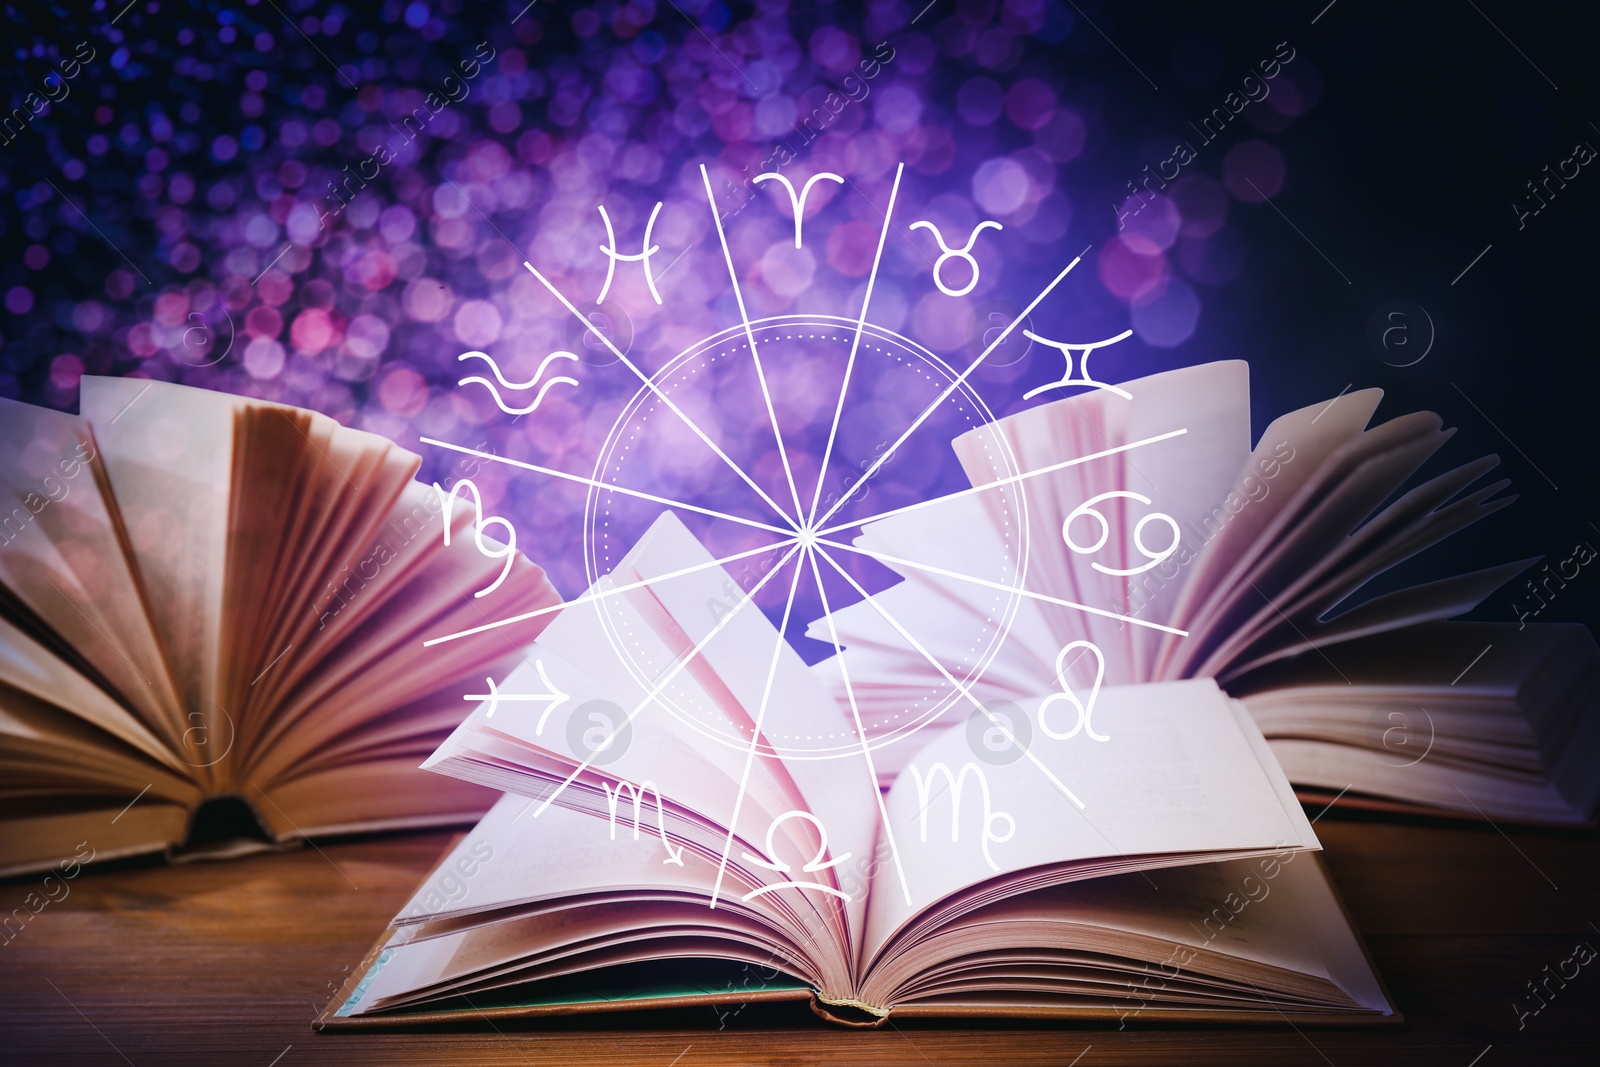 Image of Open books on wooden table and illustration of zodiac wheel with astrological signs